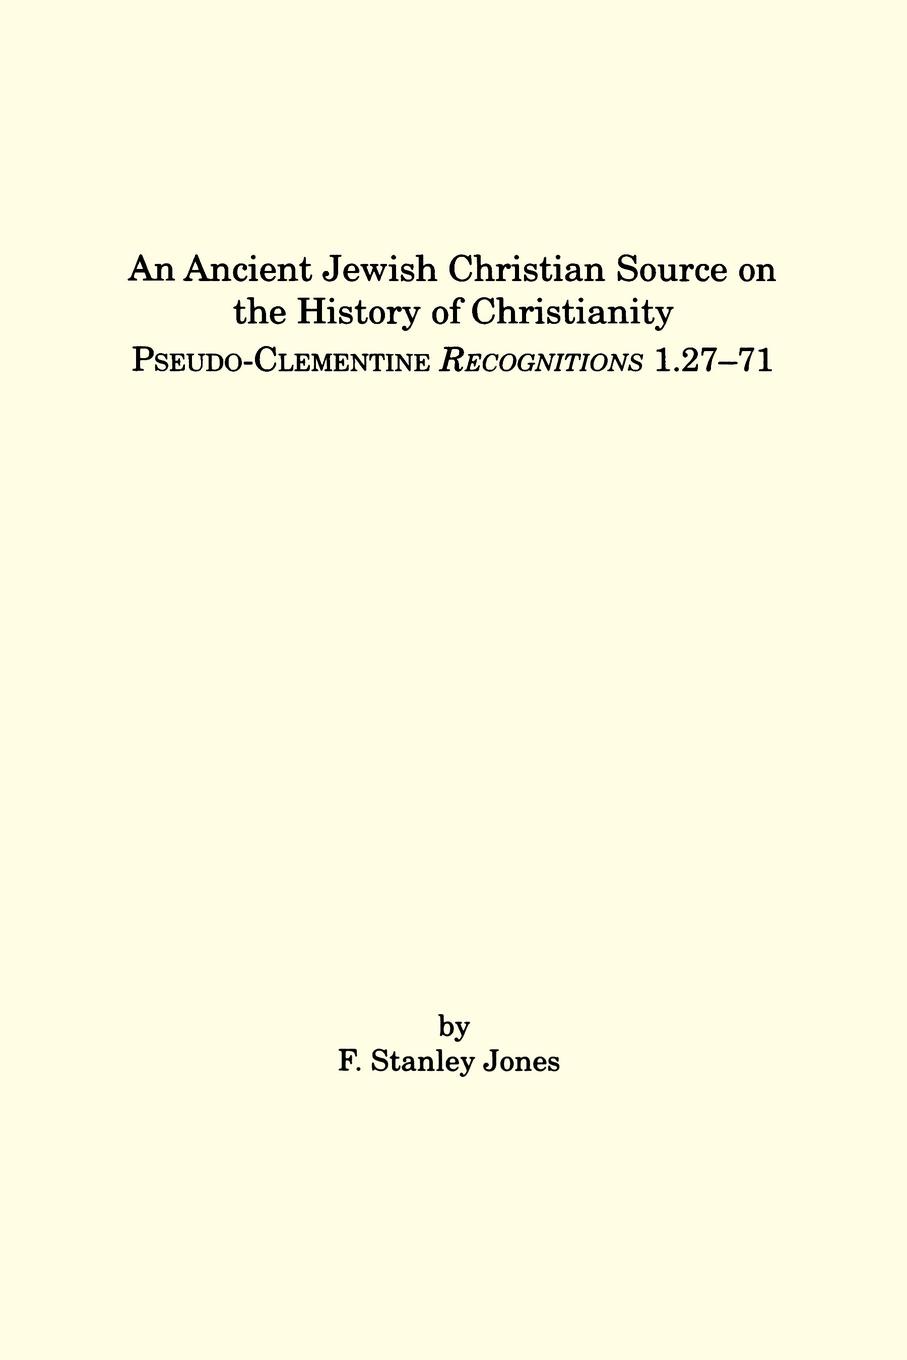 An Ancient Jewish Christian Source on the History of Christianity. Pseudo-Clementine Recognitions 1.27-71